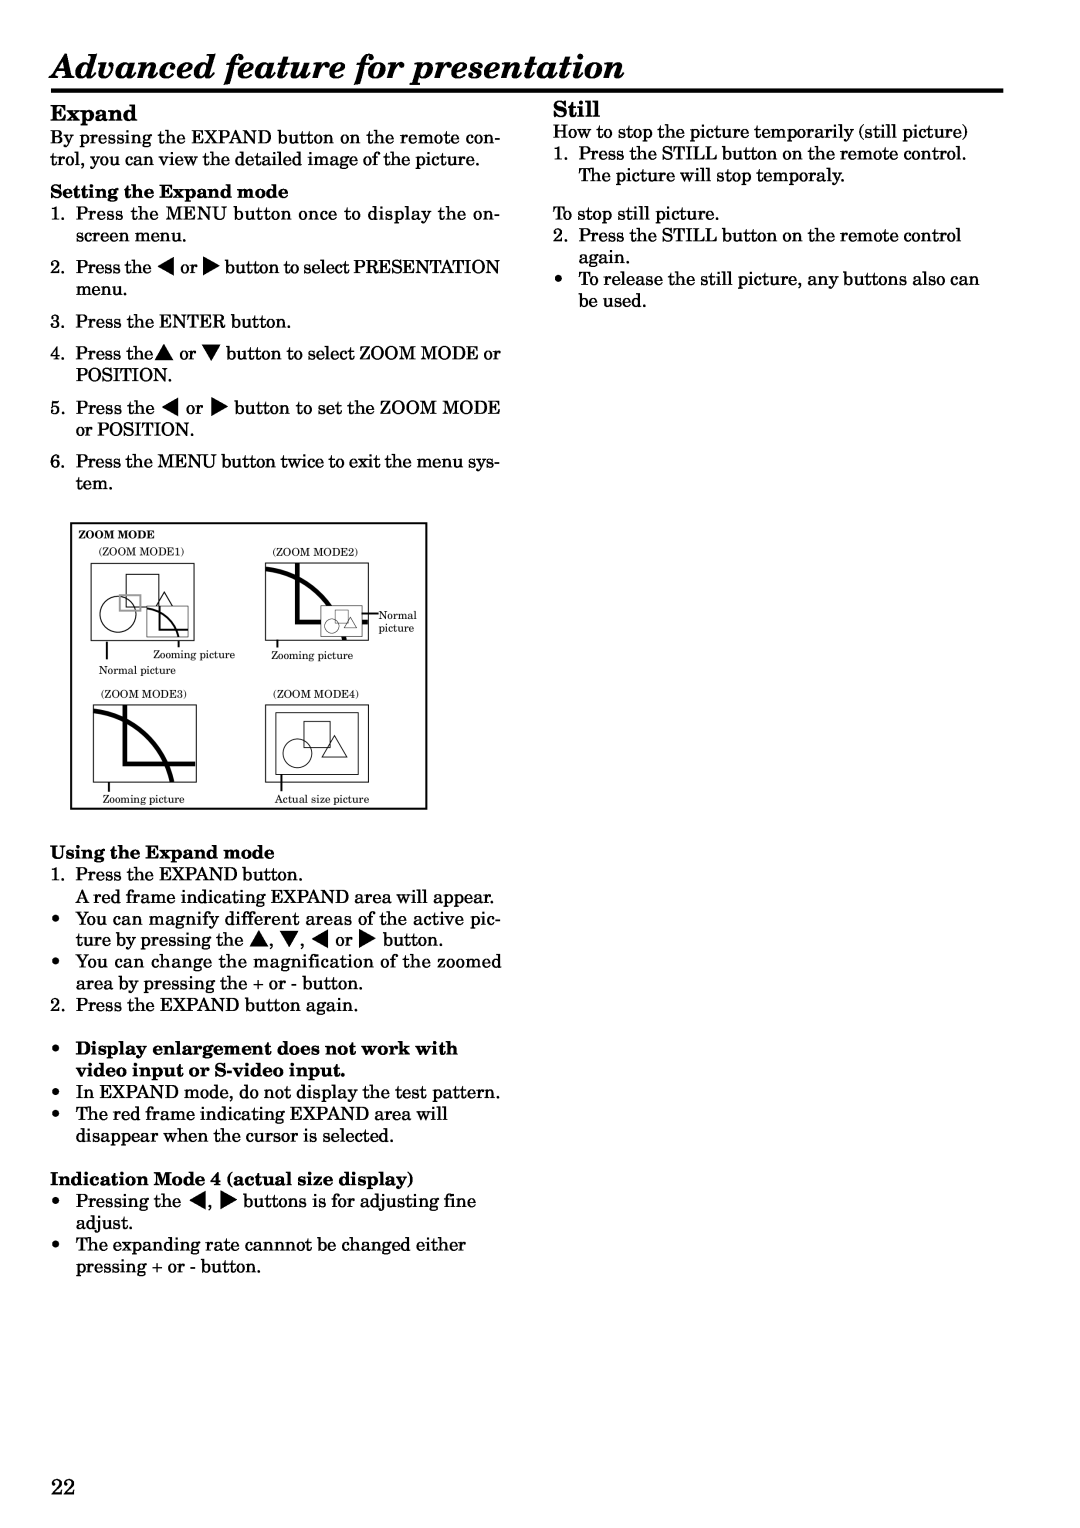 Mitsubishi Electronics LVP-X120A user manual Advanced feature for presentation, Still, Setting the Expand mode 